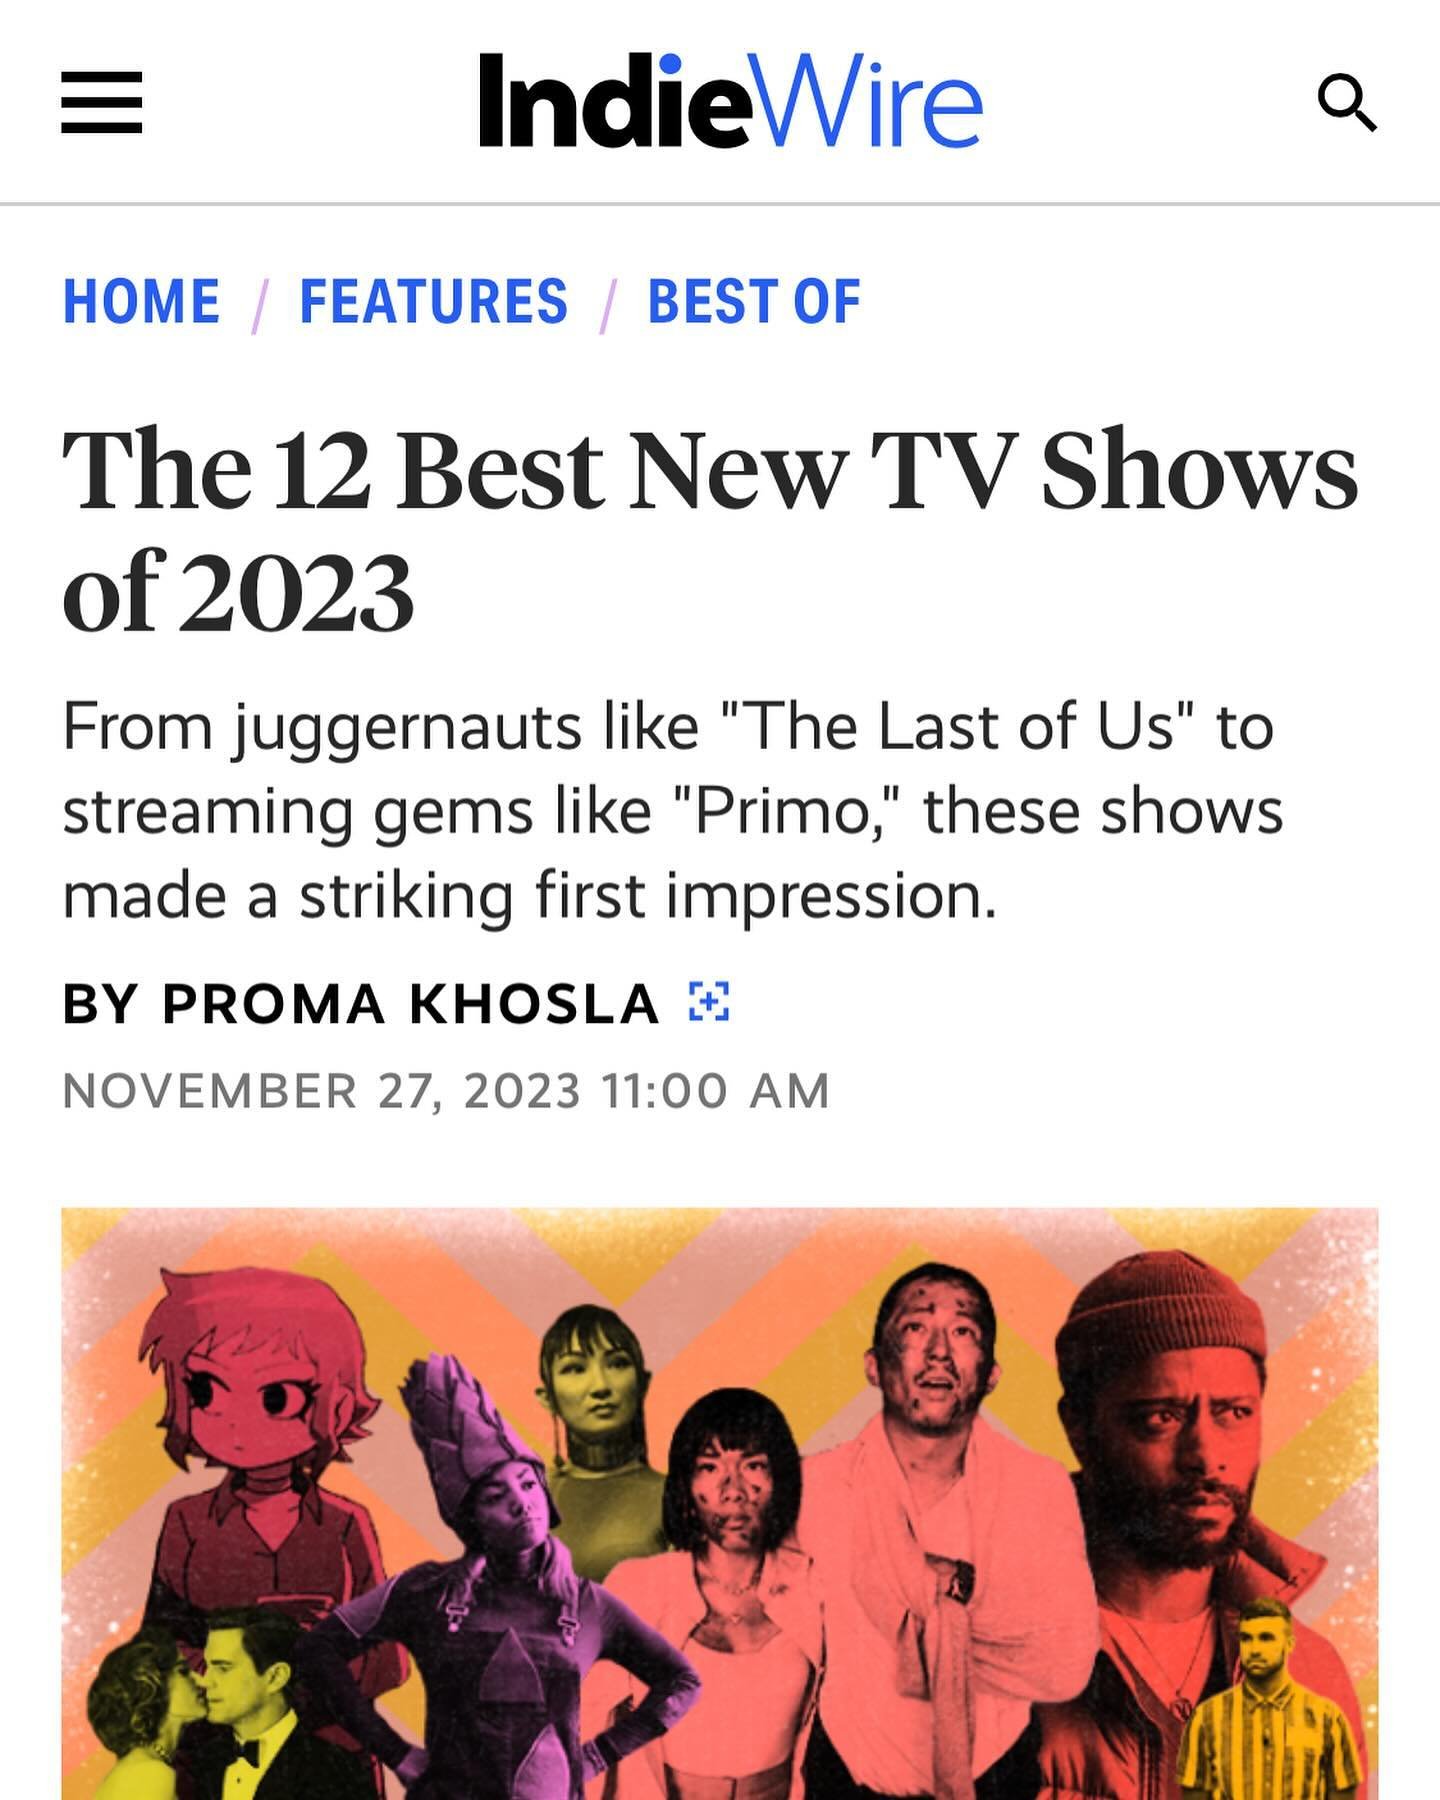 Congratulations to our showrunners @damonlindelof #tarahernandez and directors #owenharris @aletheajones and producers @louism44 and #eugenekelly on making one of the best 12 shows of 2023 from @indiewire Bravo! ❤️ @warnerbrostv @peacock